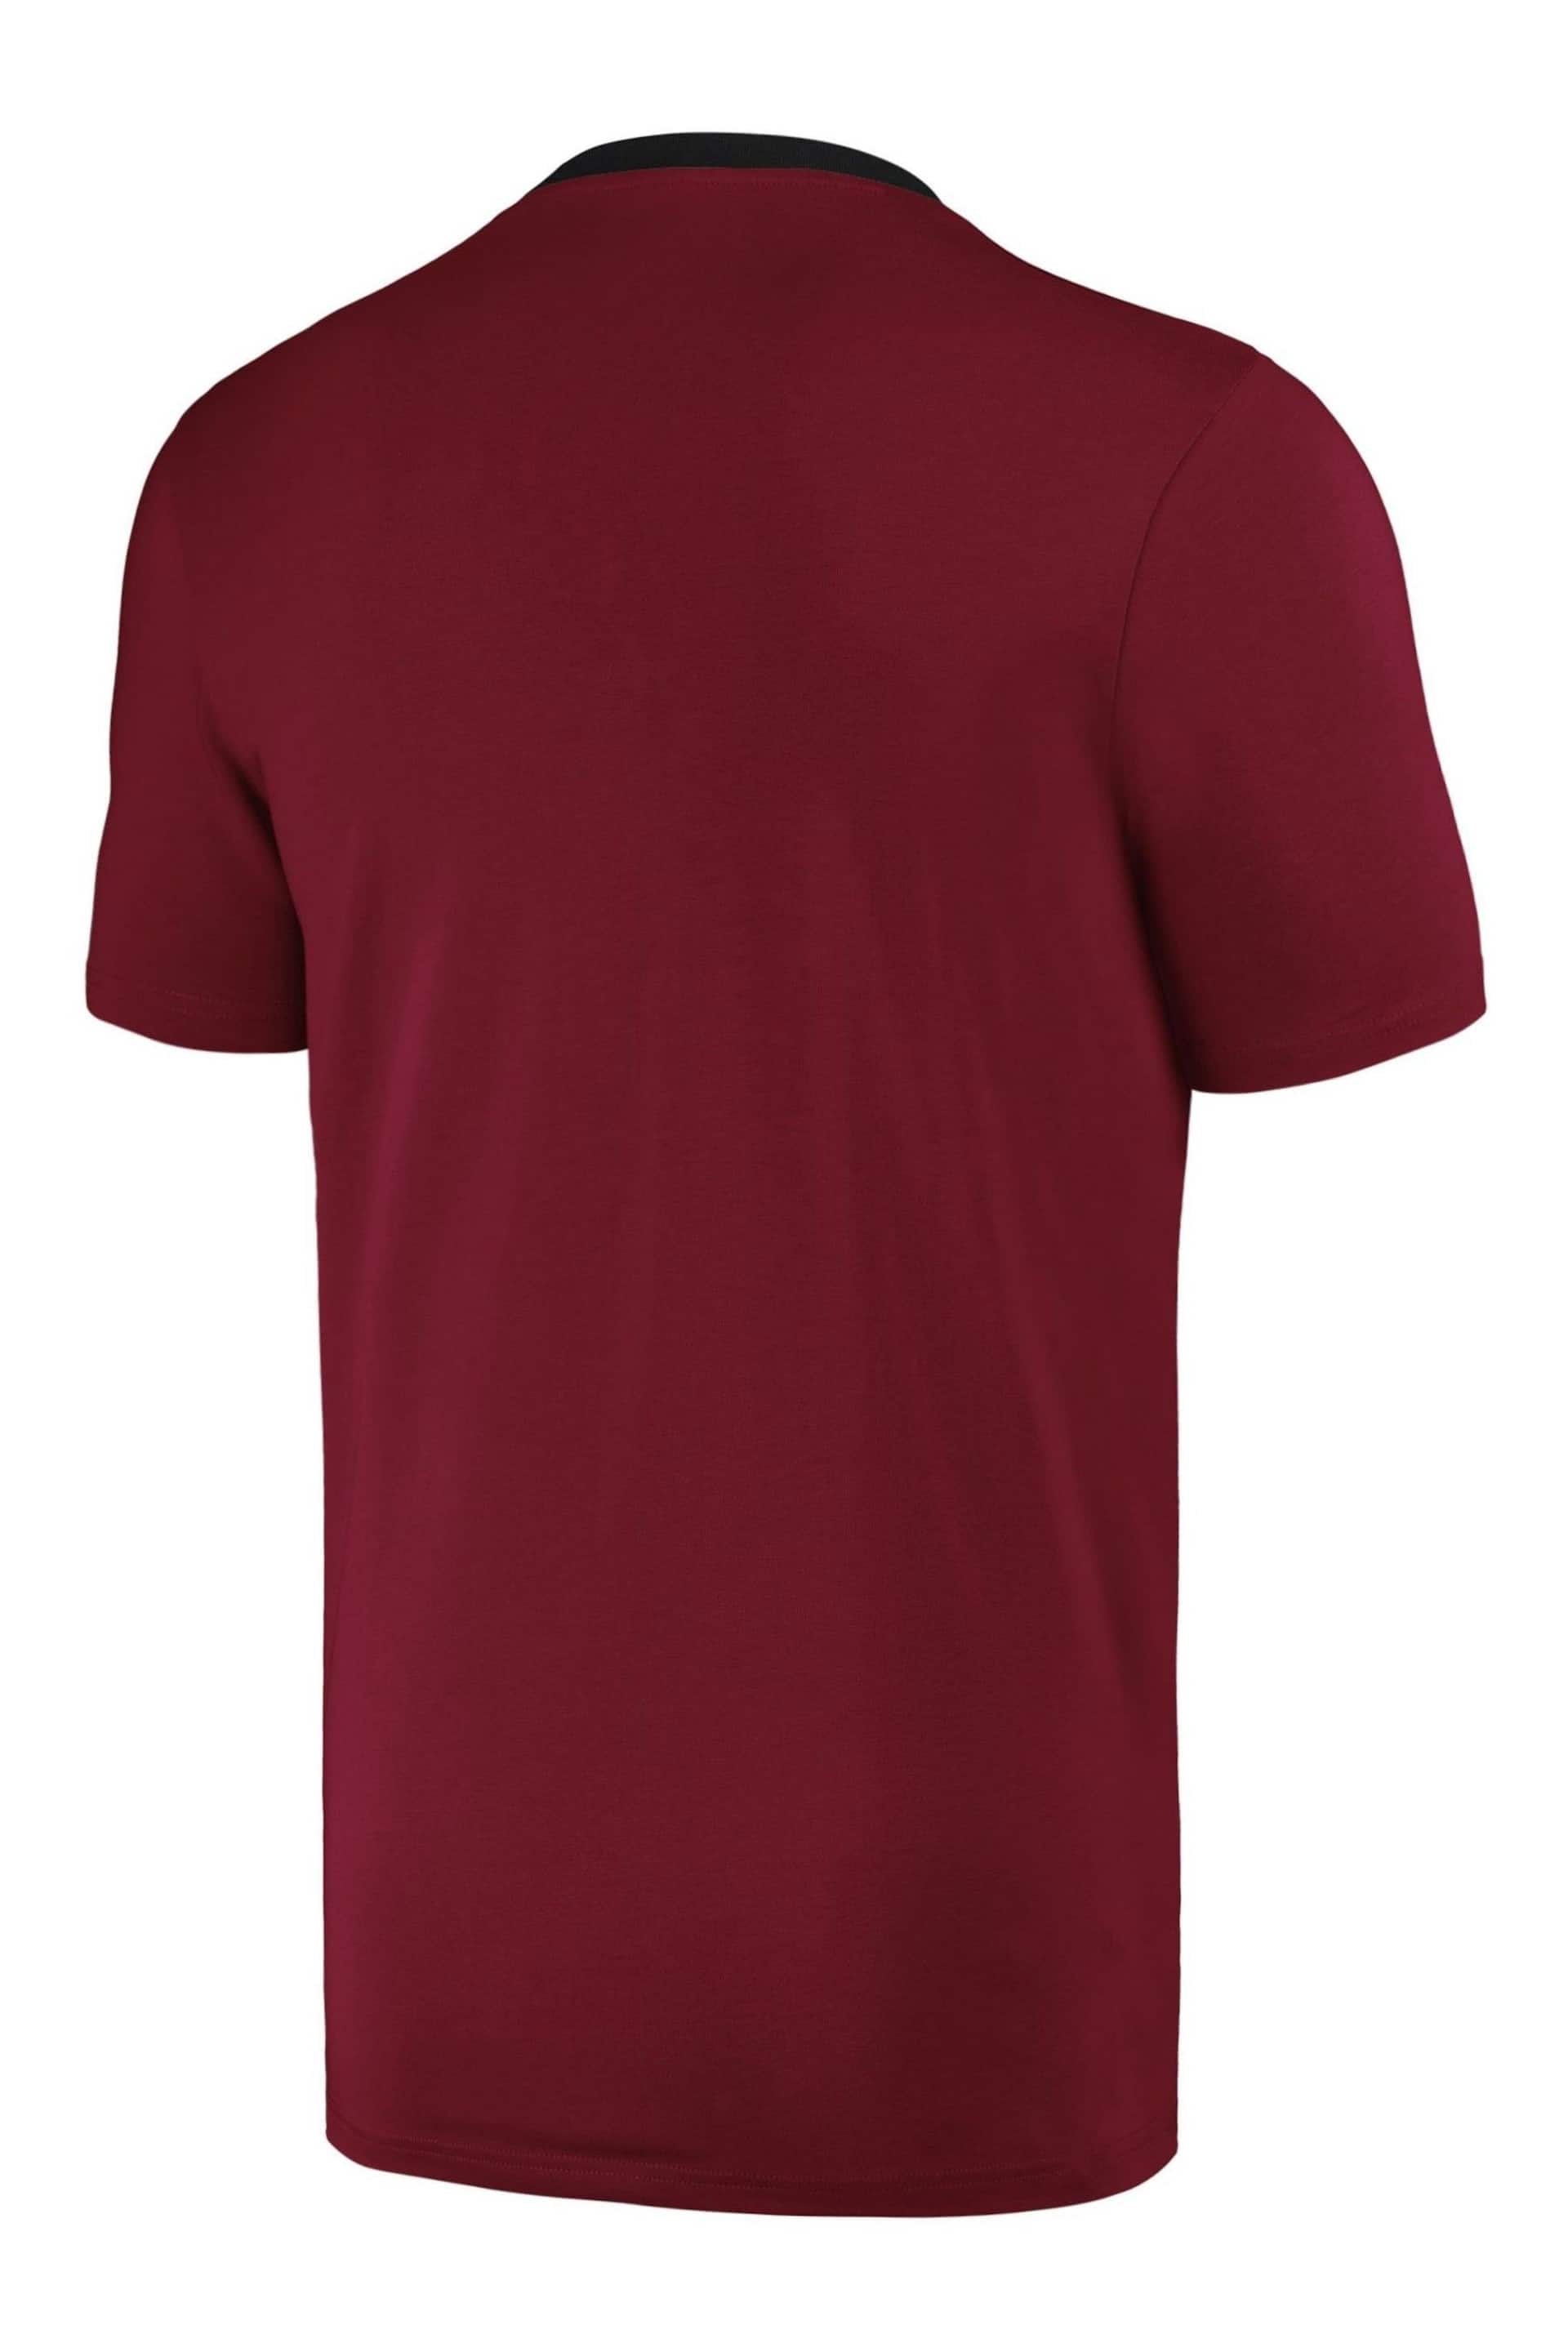 Castore Red Aston Villa Players Training Top - Image 3 of 3